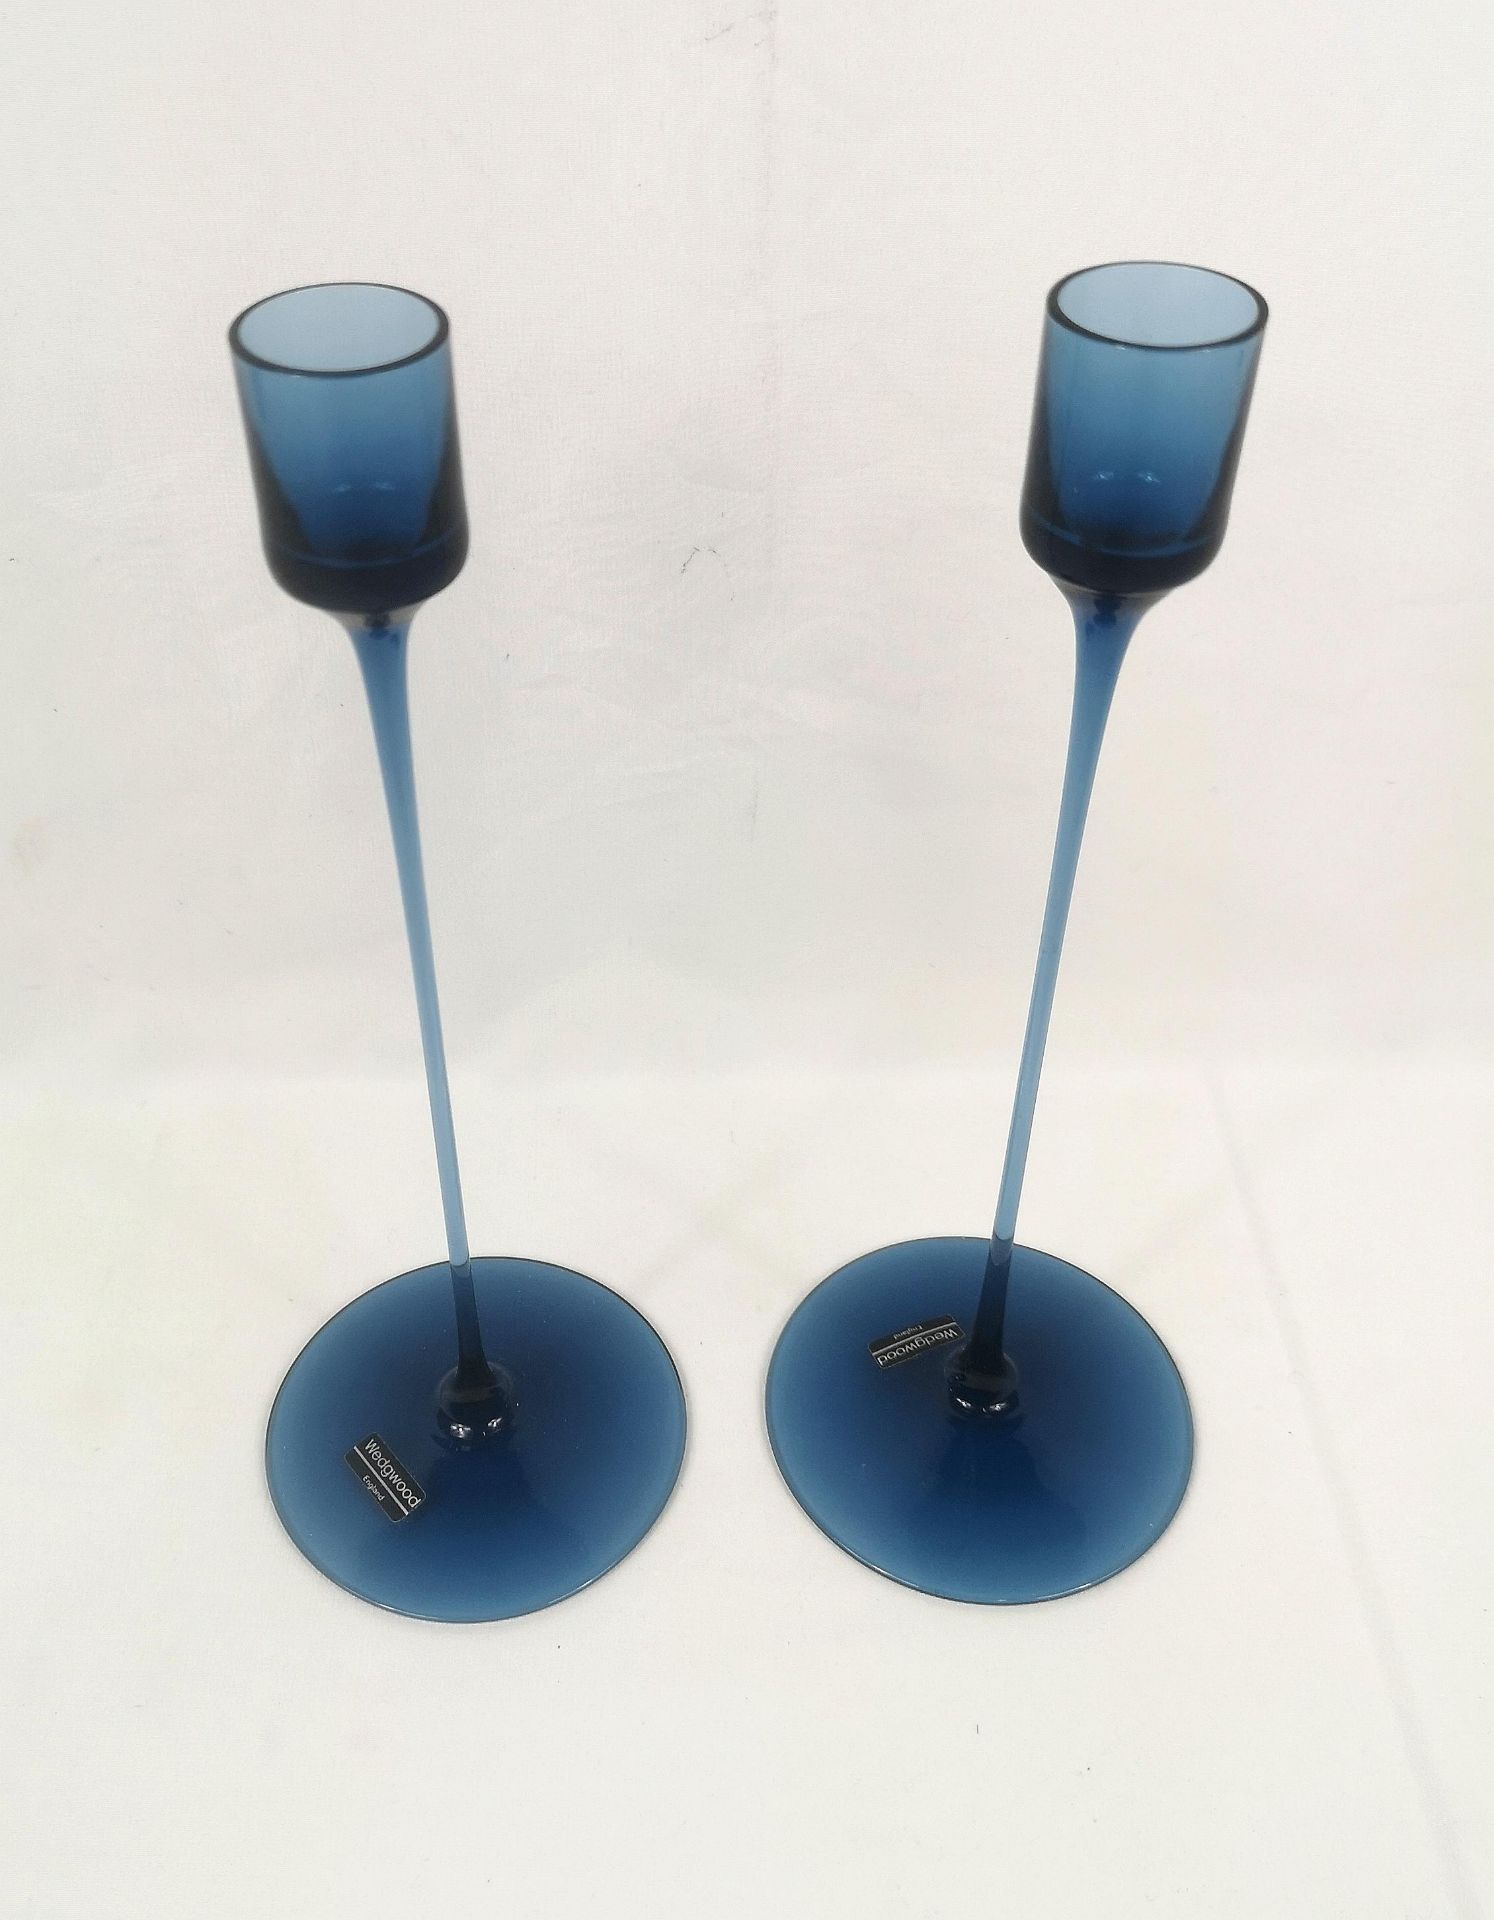 Pair of Wedgwood blue glass candlesticks - Image 3 of 4